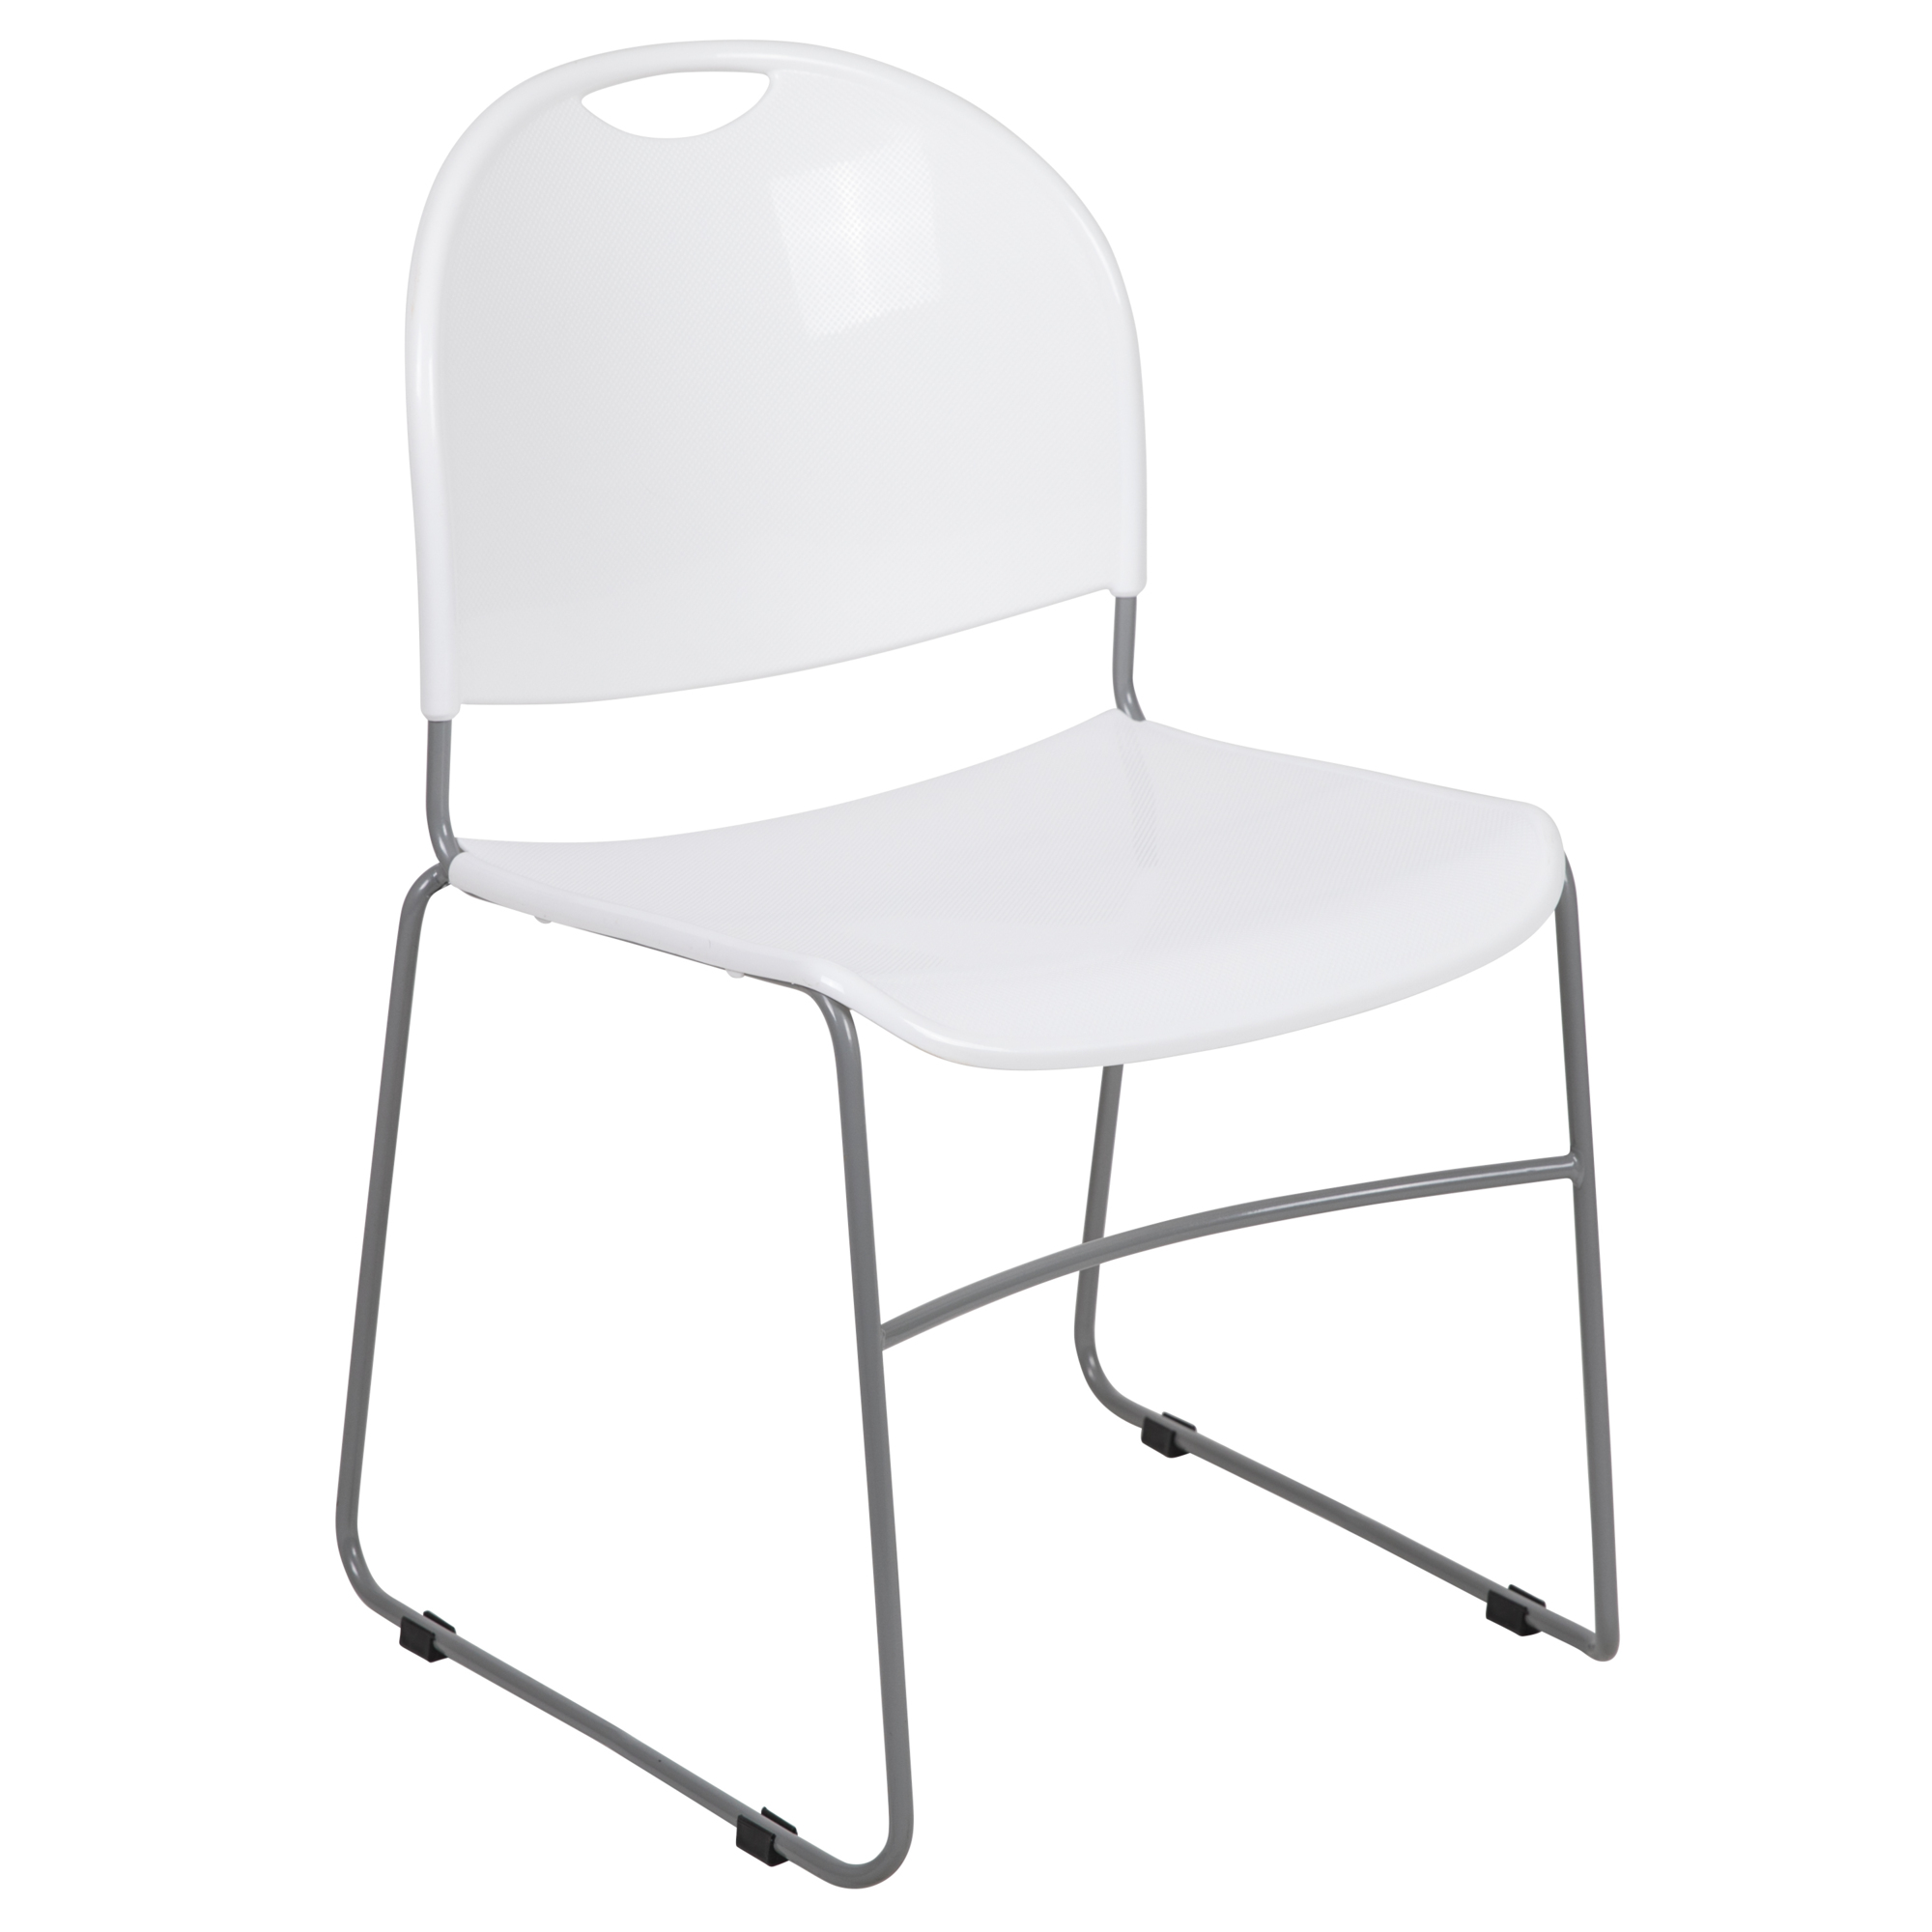 Flash Furniture, White Compact School Stack Chair - Guest Chair, Primary Color White, Included (qty.) 1, Model RUT188WH